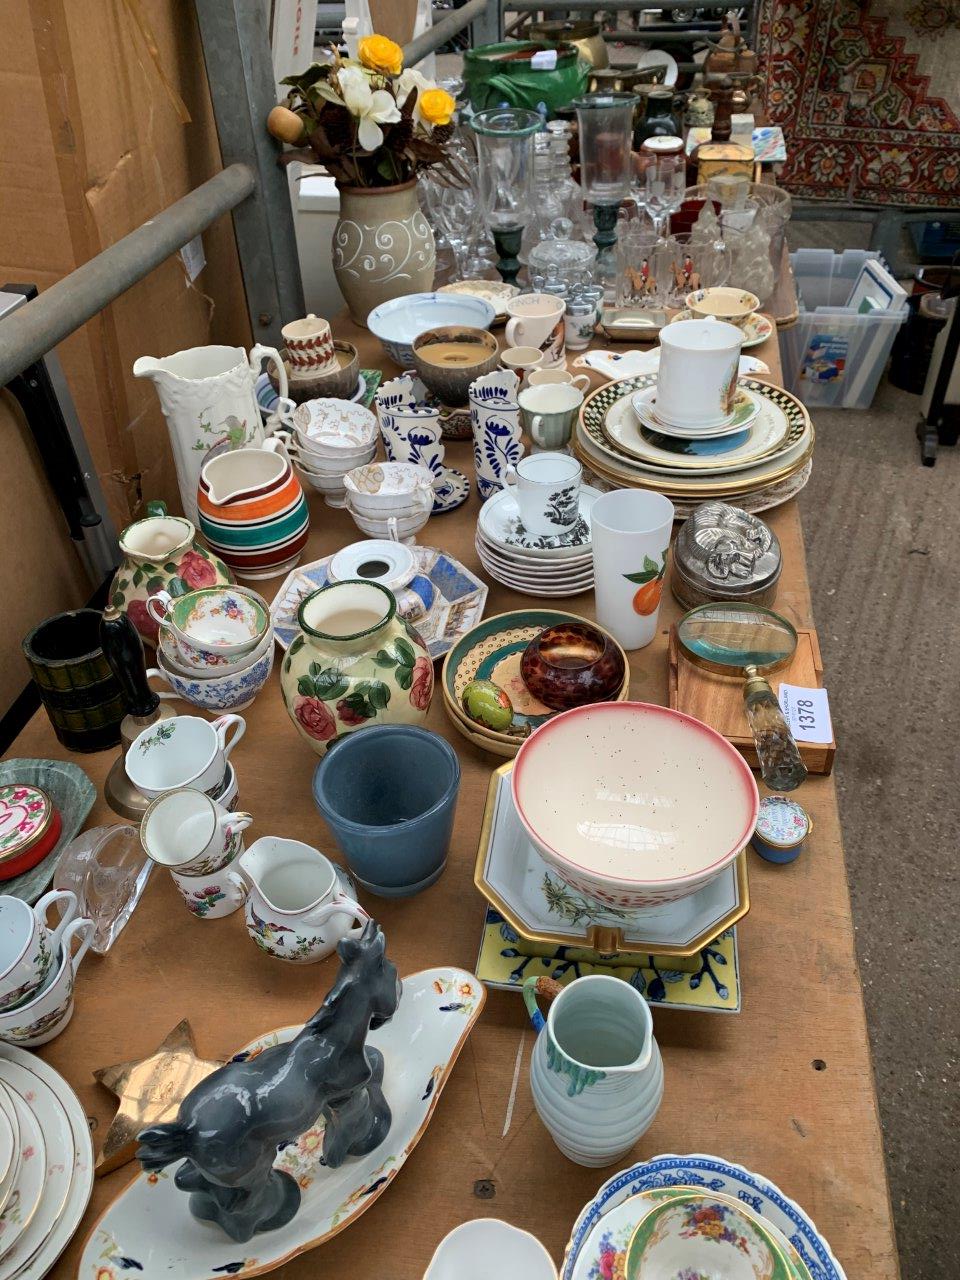 Large quantity of chinaware, glassware, pottery, metal ware.